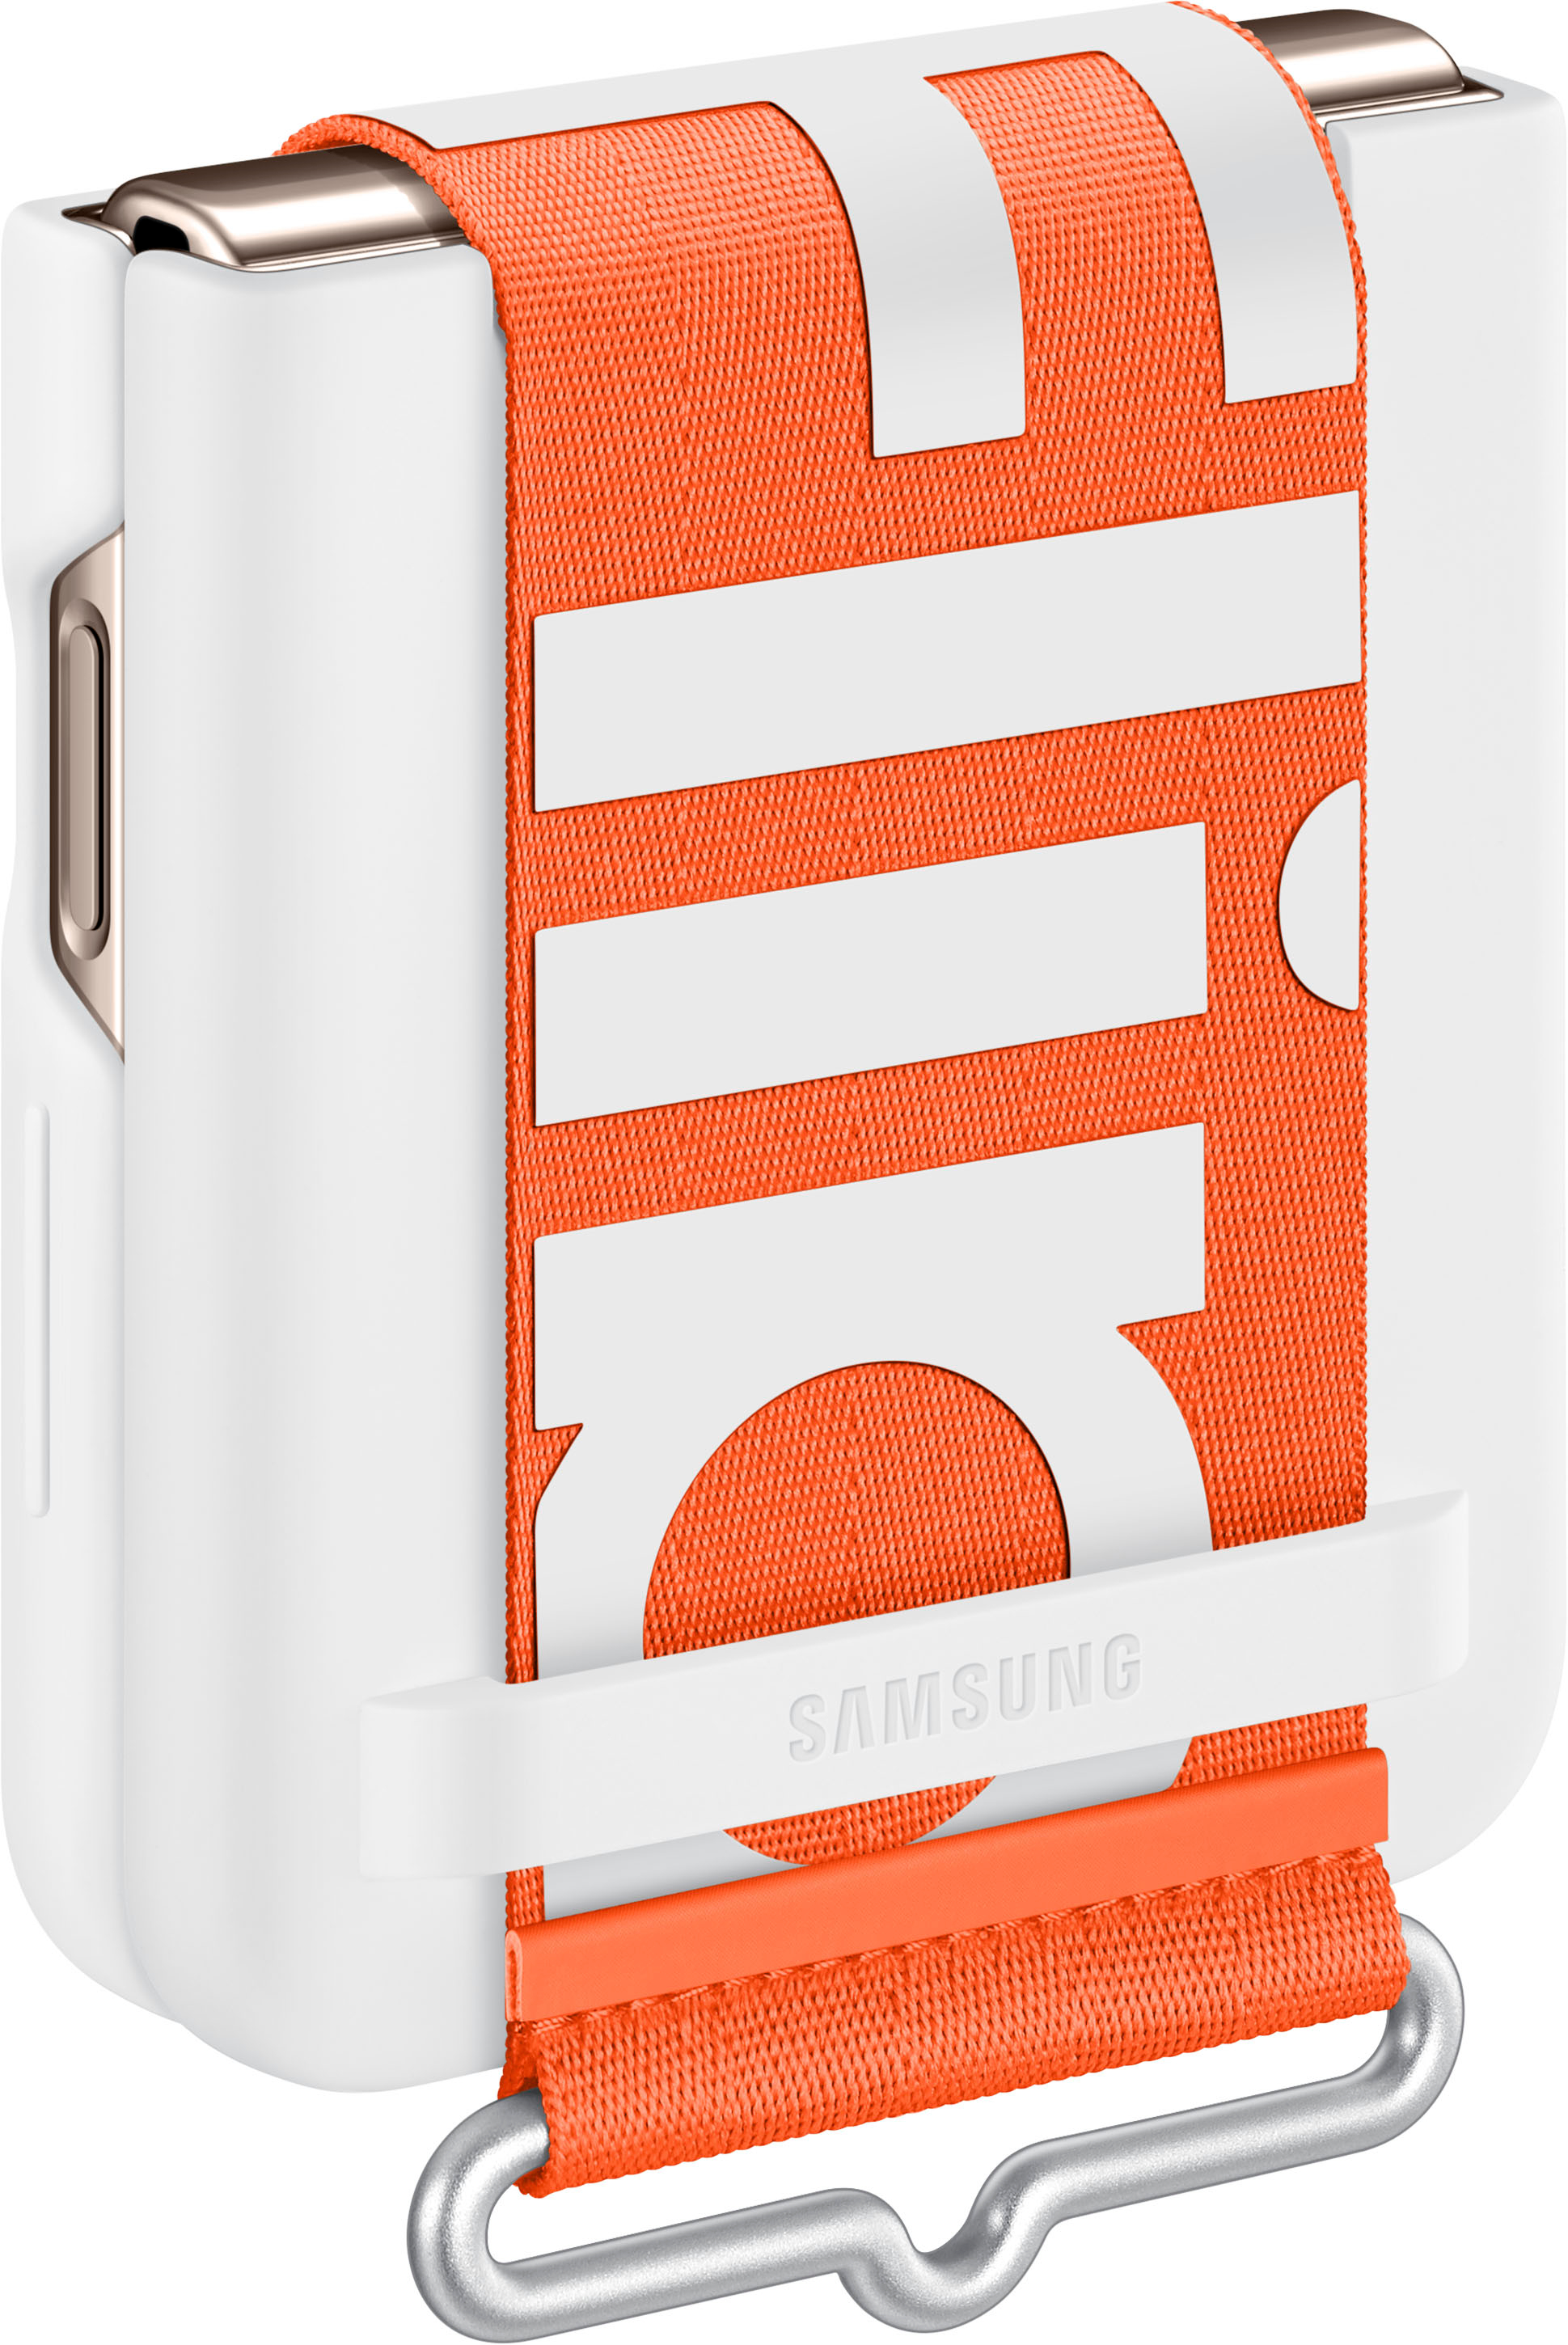 wowacase Samsung Galaxy Z Flip 4 Case with Ring & Strap (Color: White)